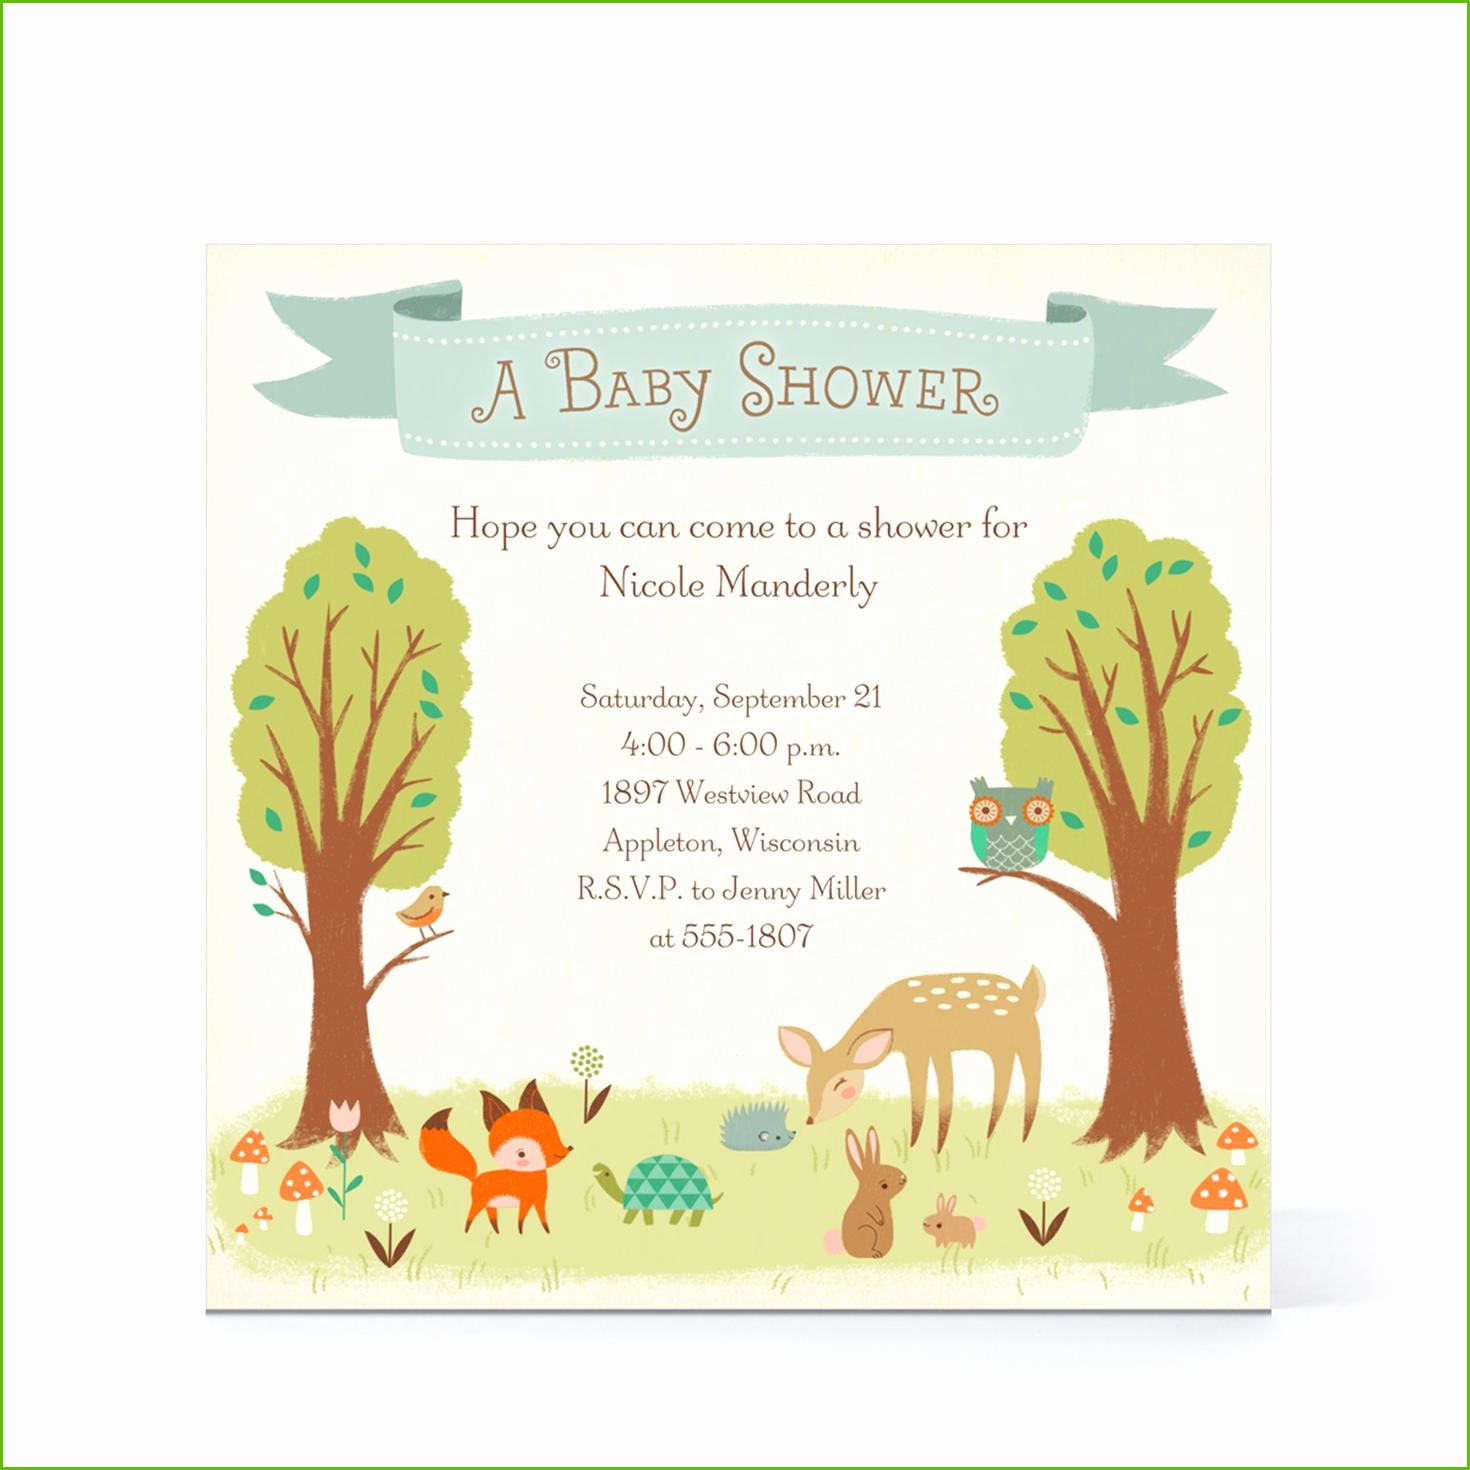 Full Size of Baby Shower:49+ Prime Baby Shower Card Message Photo Concepts Baby Shower Card Message And Baby Shower Locations With Fiesta Baby Shower Plus Baby Shower Cards Together With Baby Shower De Niño As Well As Baby Shower Notes